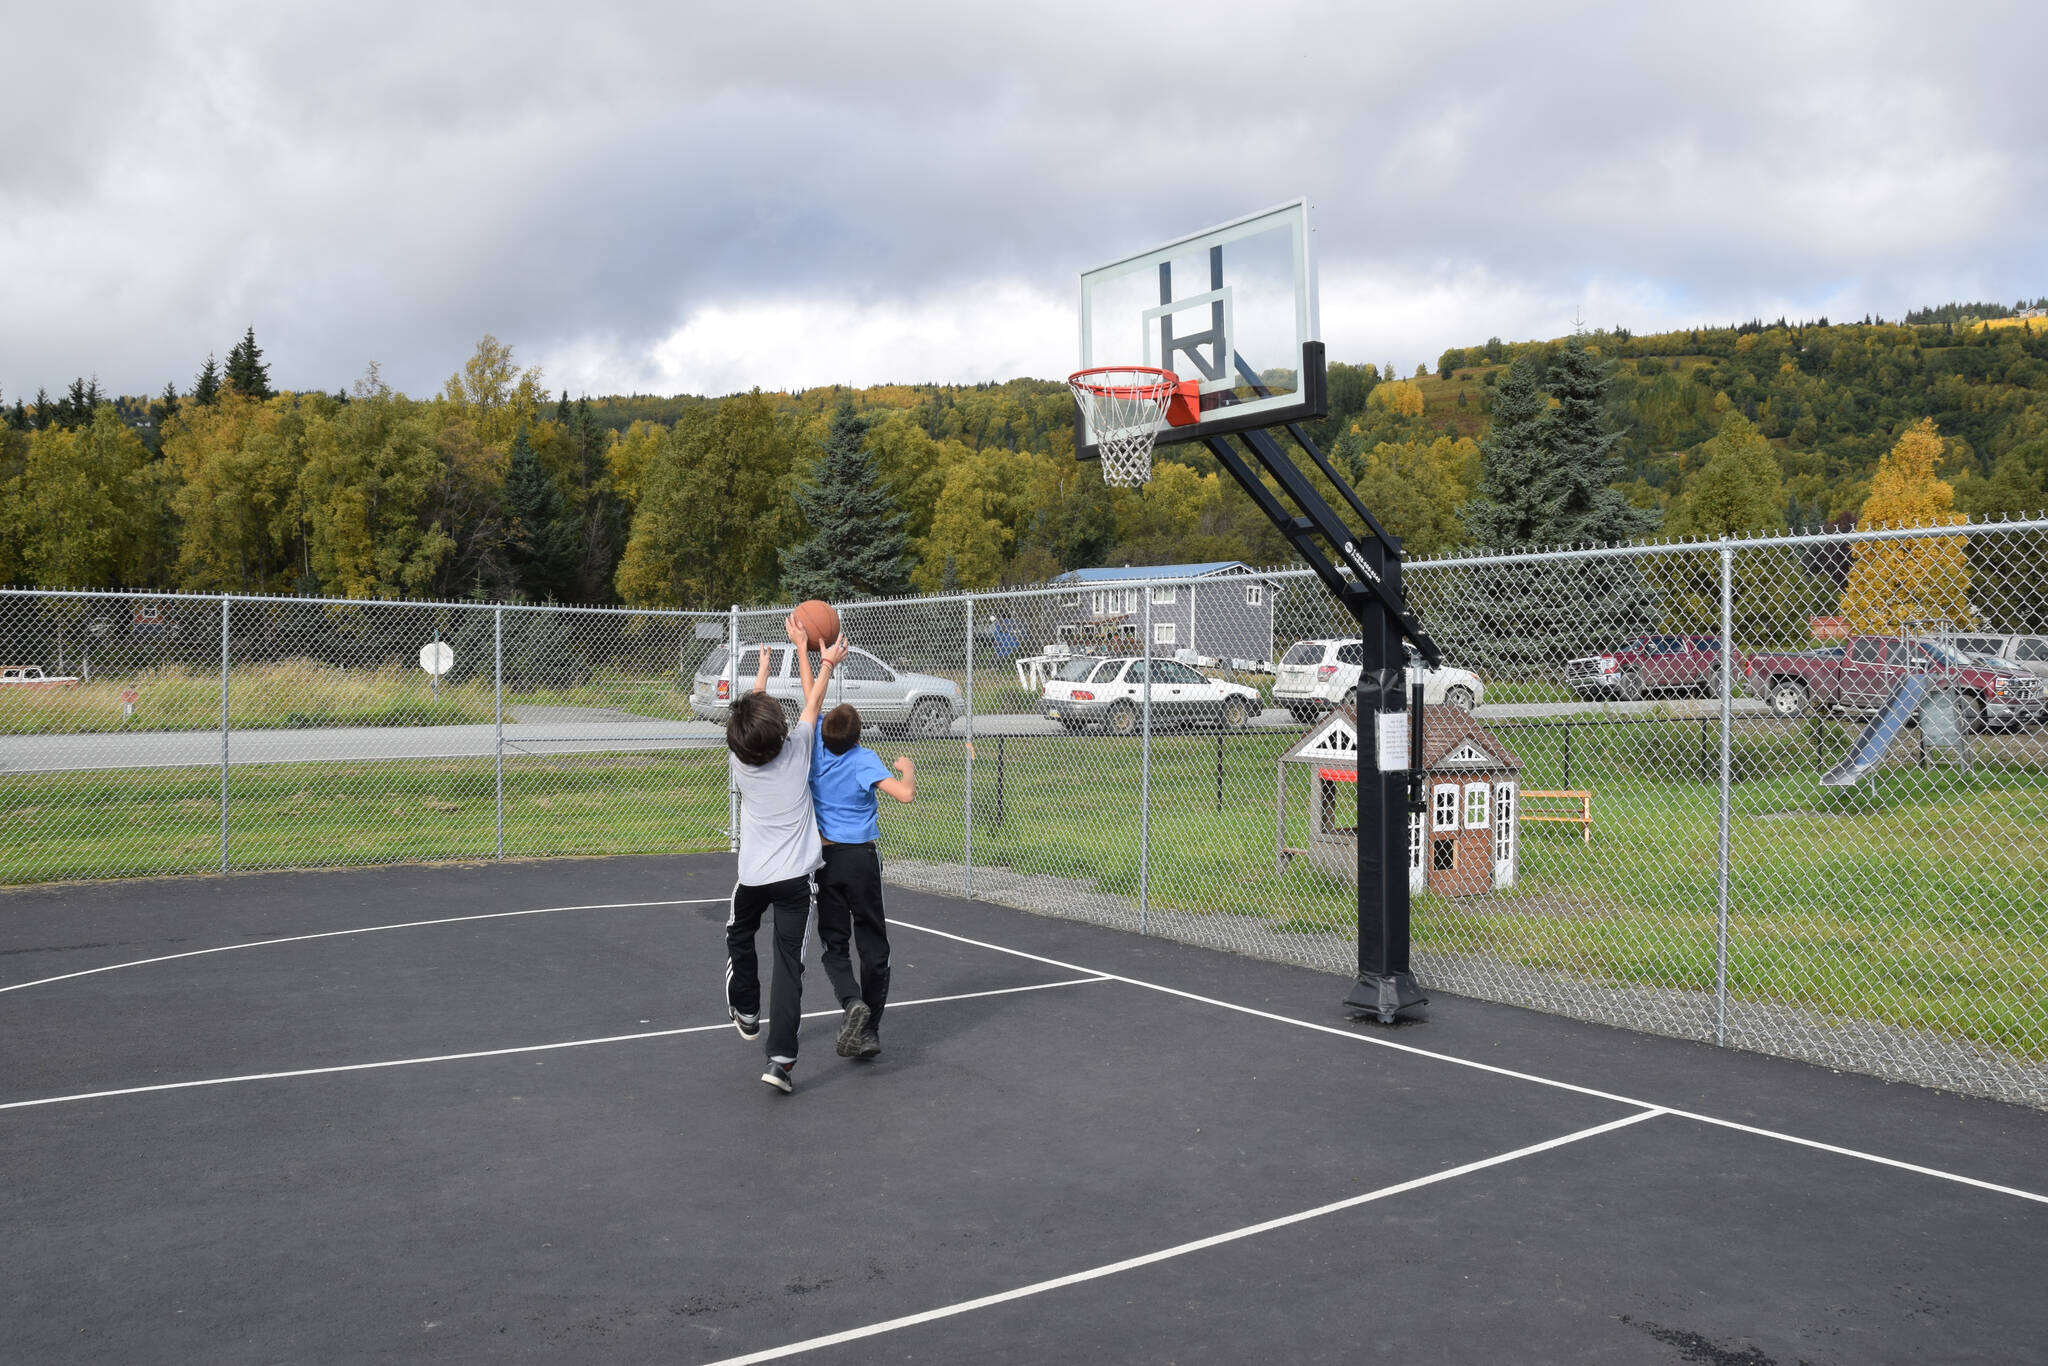 Kids play basketball at the Kachemak City Park Grand Opening on Saturday, Sept. 17, 2022. (Photo by Charlie Menke / Homer News)